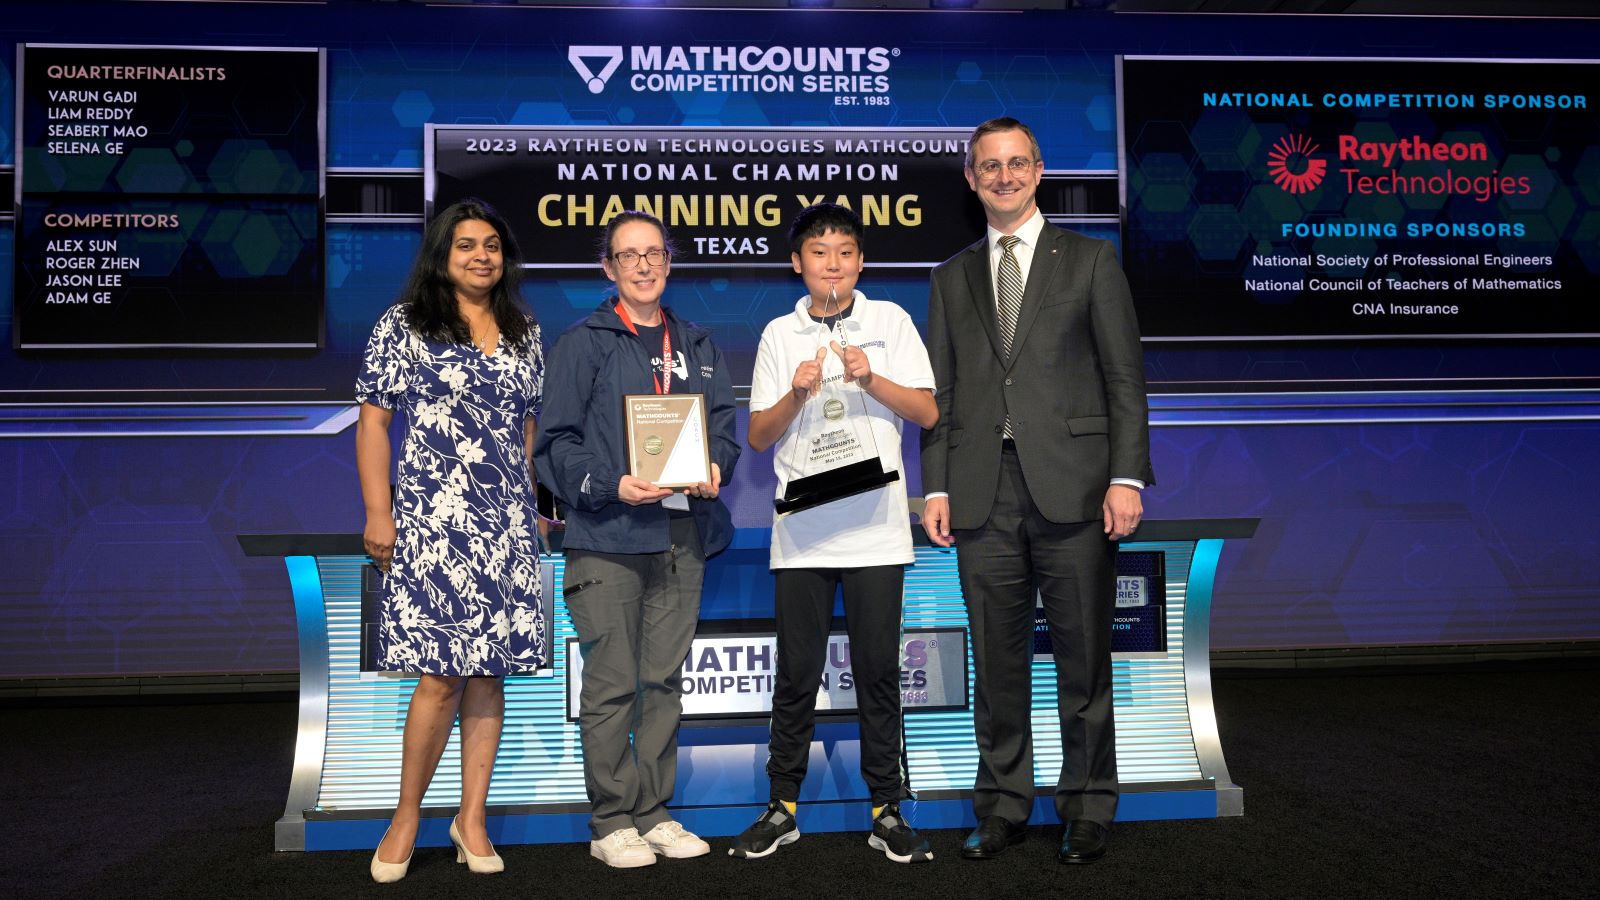 The 2023 National Champion, Channing Yang, poses with his coach and representatives from MATHCOUNTS sponsors.